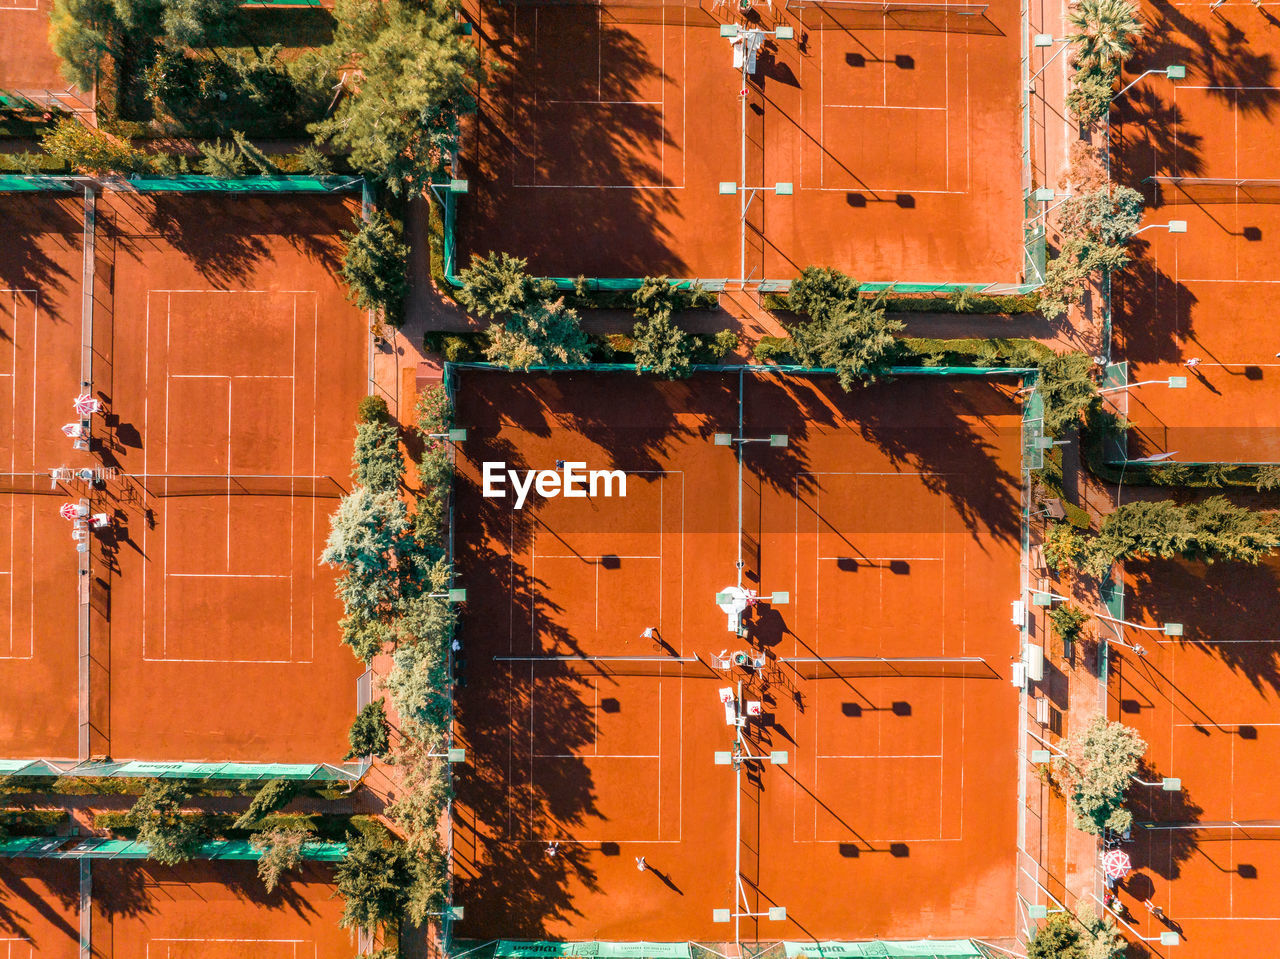 Aerial view of the tennis courts in the resort.